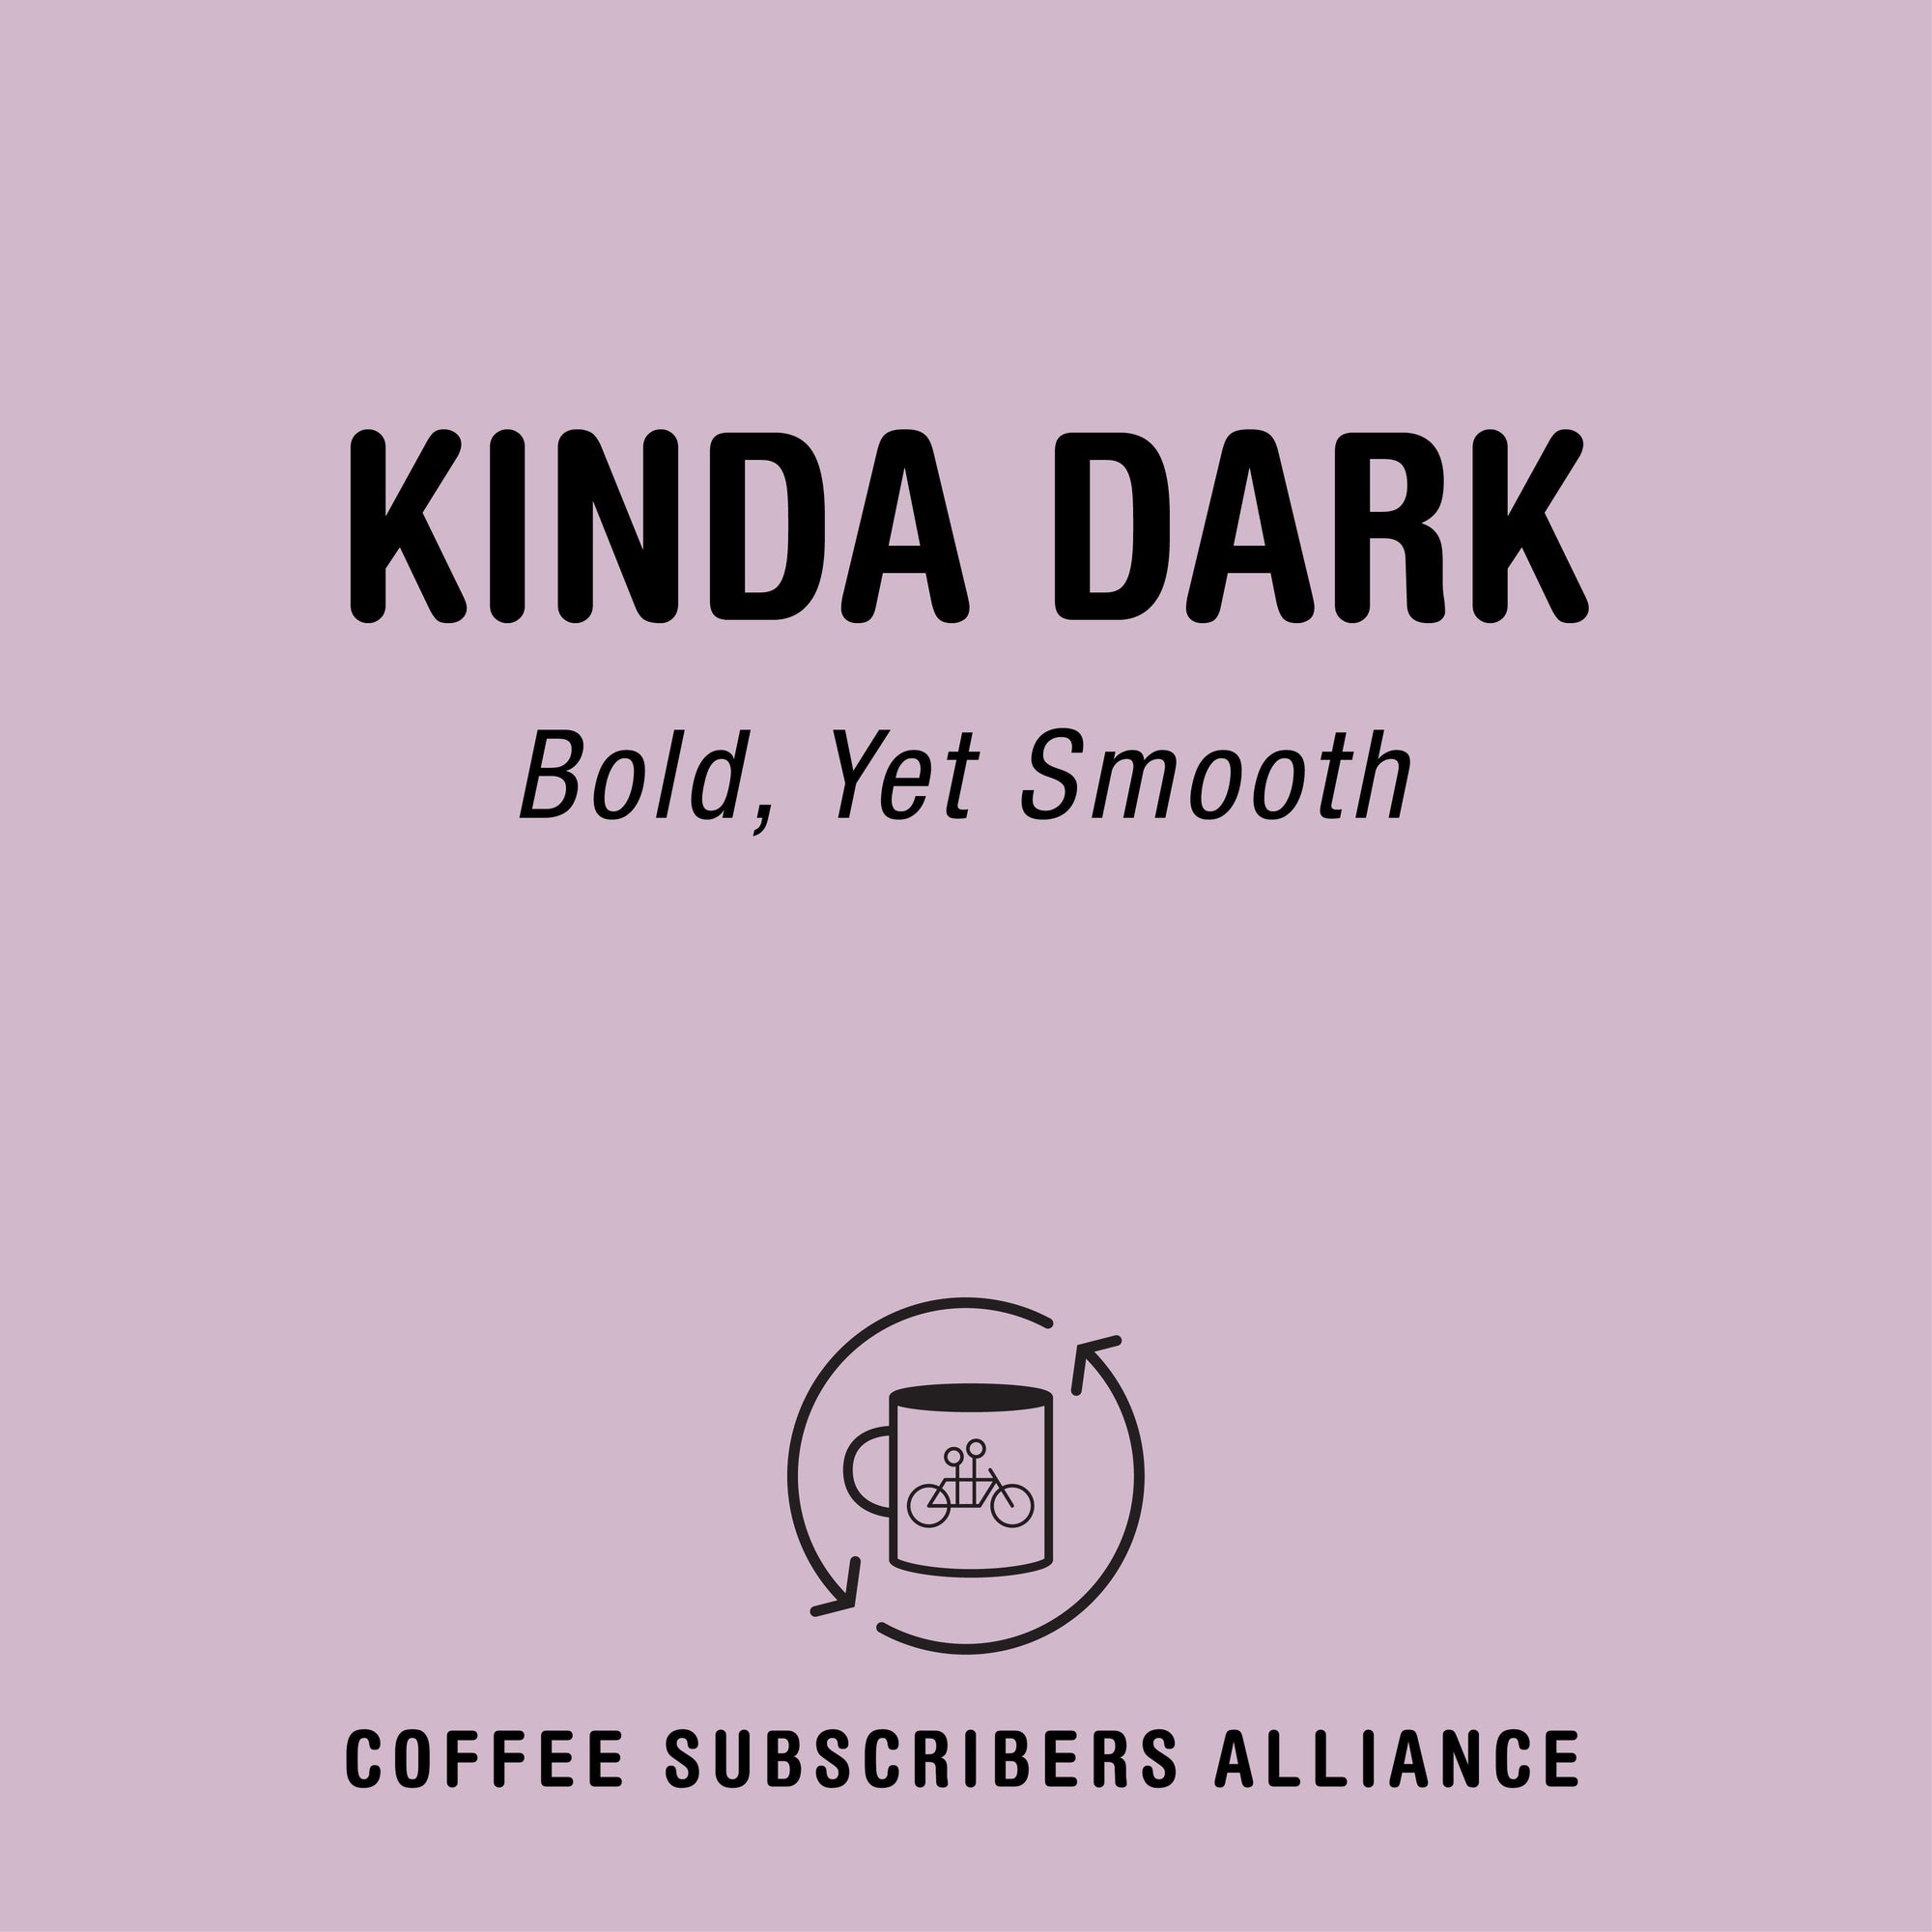 A graphic with a soft pink background featuring the text "Kinda Dark Subscription Gift - 2 Weeks x 12" in bold letters and the logo of a cup with steam, captioned "Tandem" at the